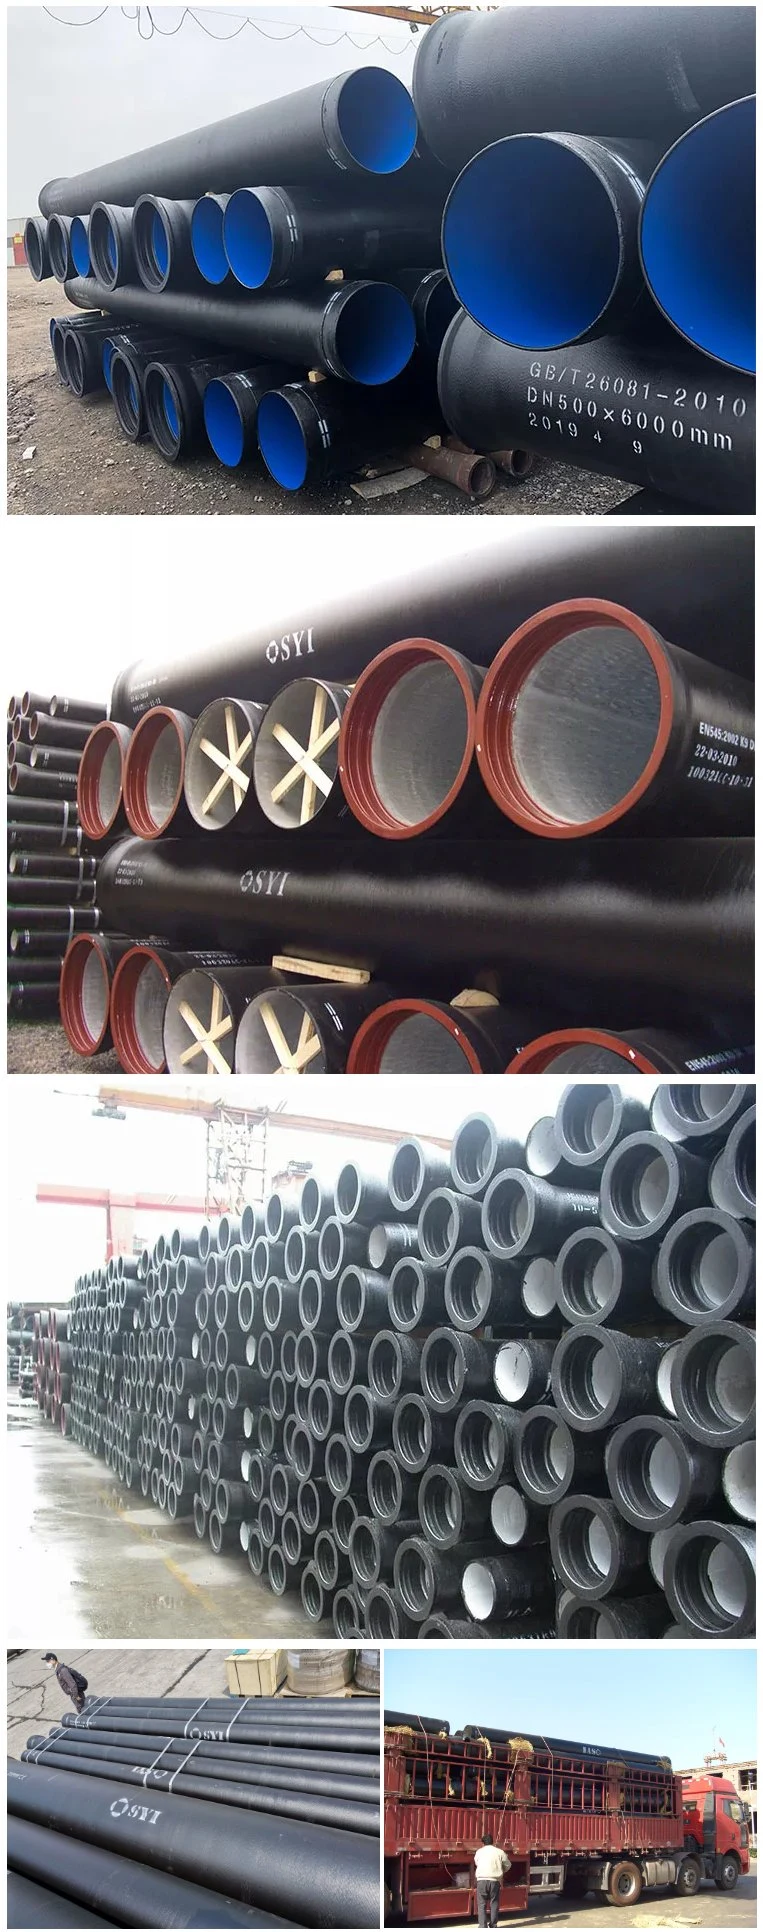 Syi ISO 10804 ISO 2531 En 545 En598 Centrifugal Cast Ductile Iron Restrained Joint Socket and Spigot Pipe